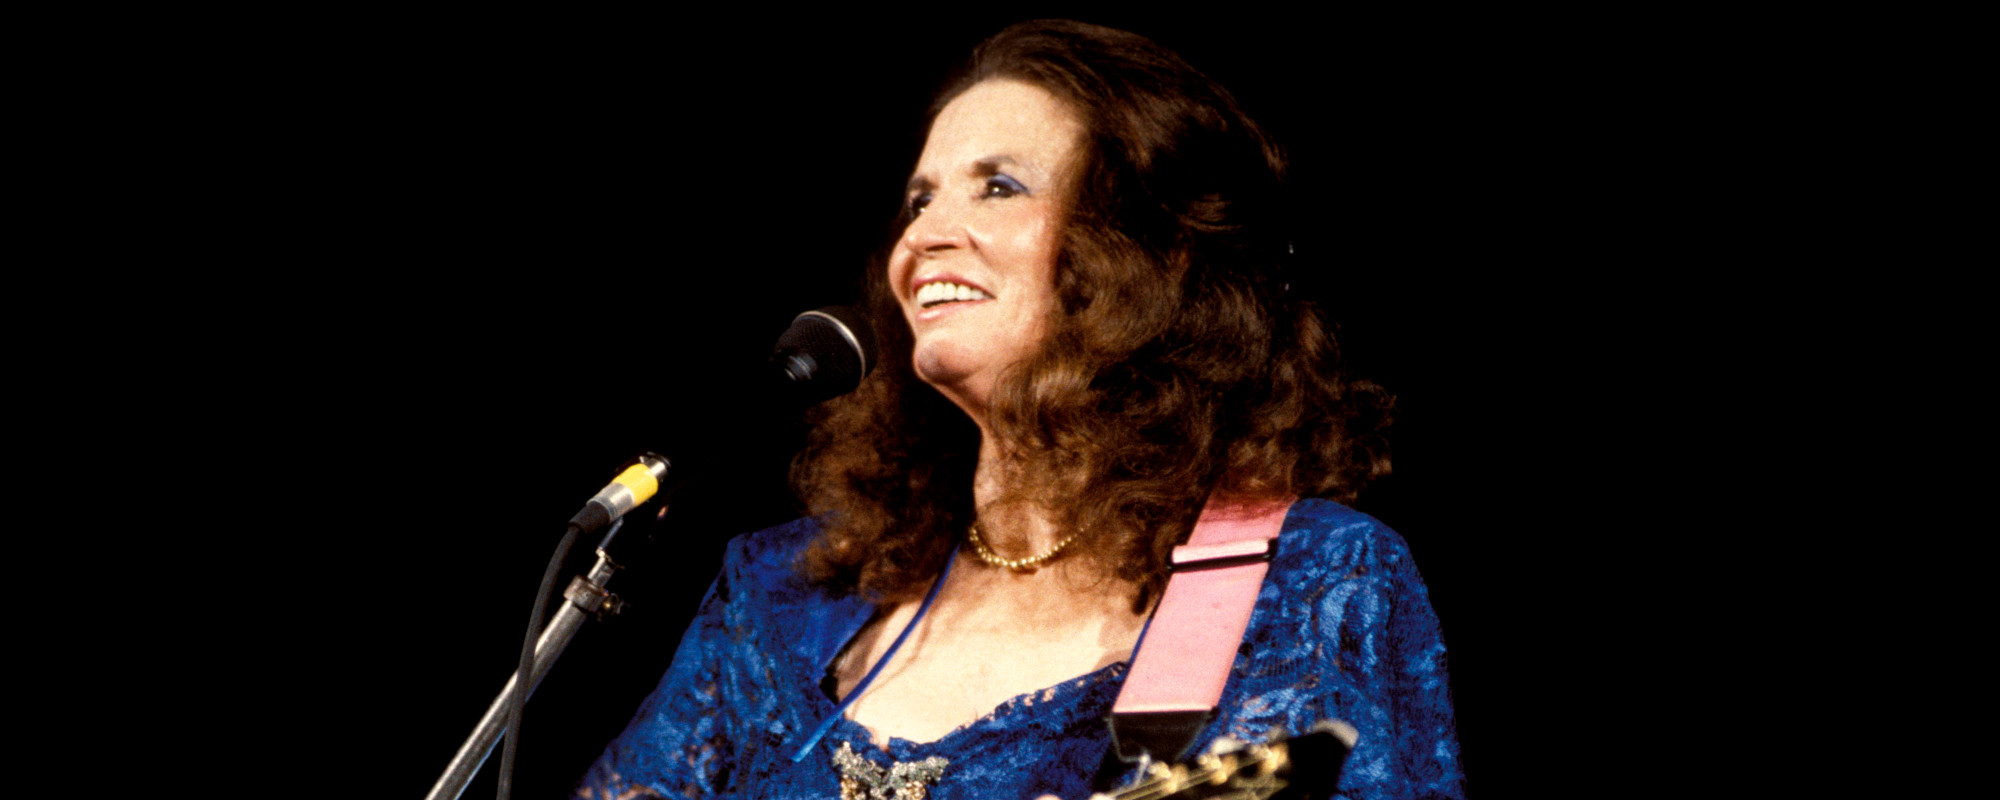 5 Live Lovable Moments in Honor of June Carter Cash